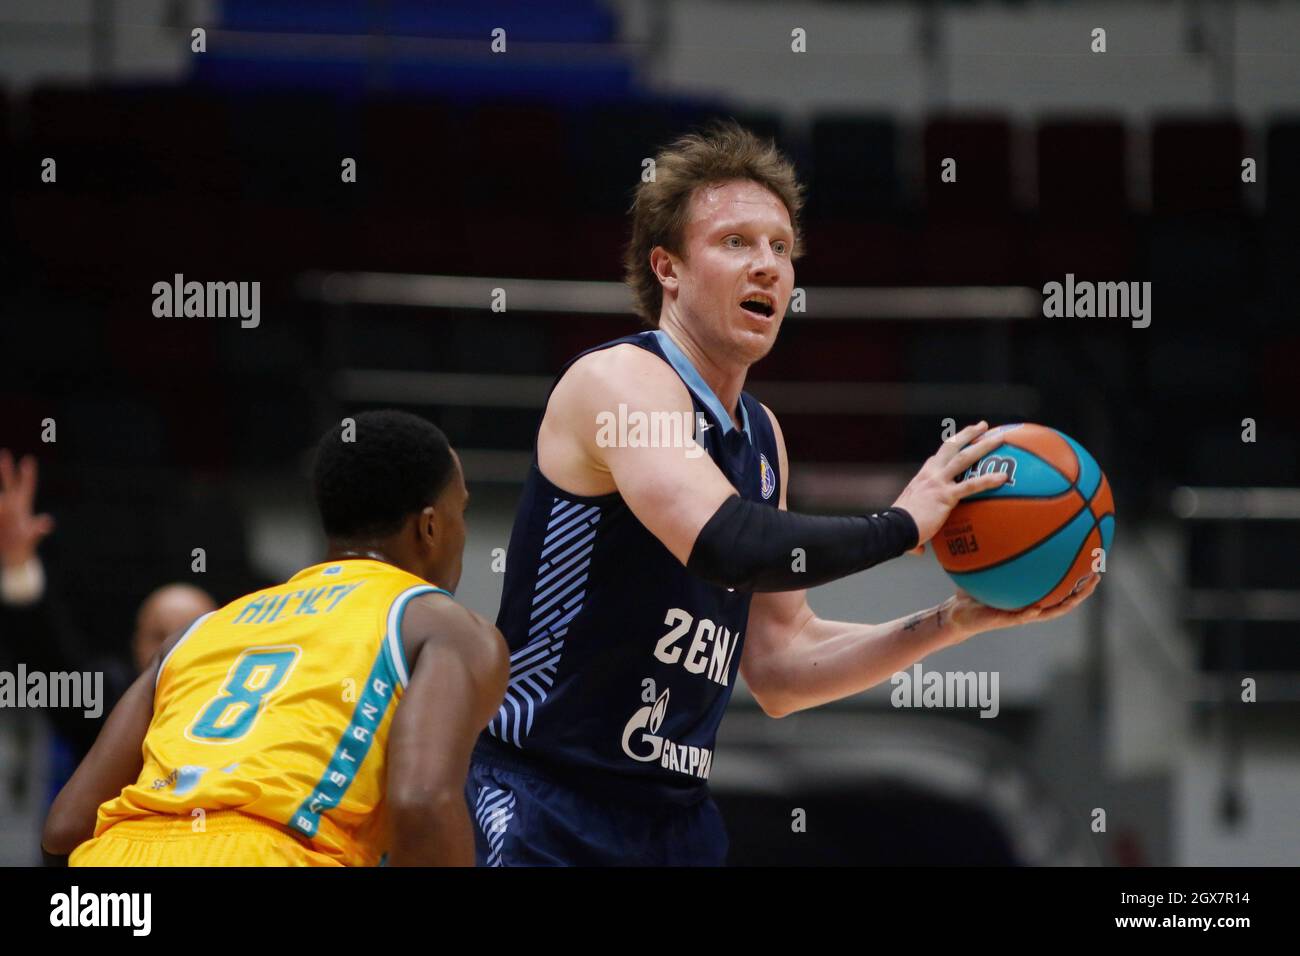 Anthony Hickey High Resolution Stock Photography and Images - Alamy